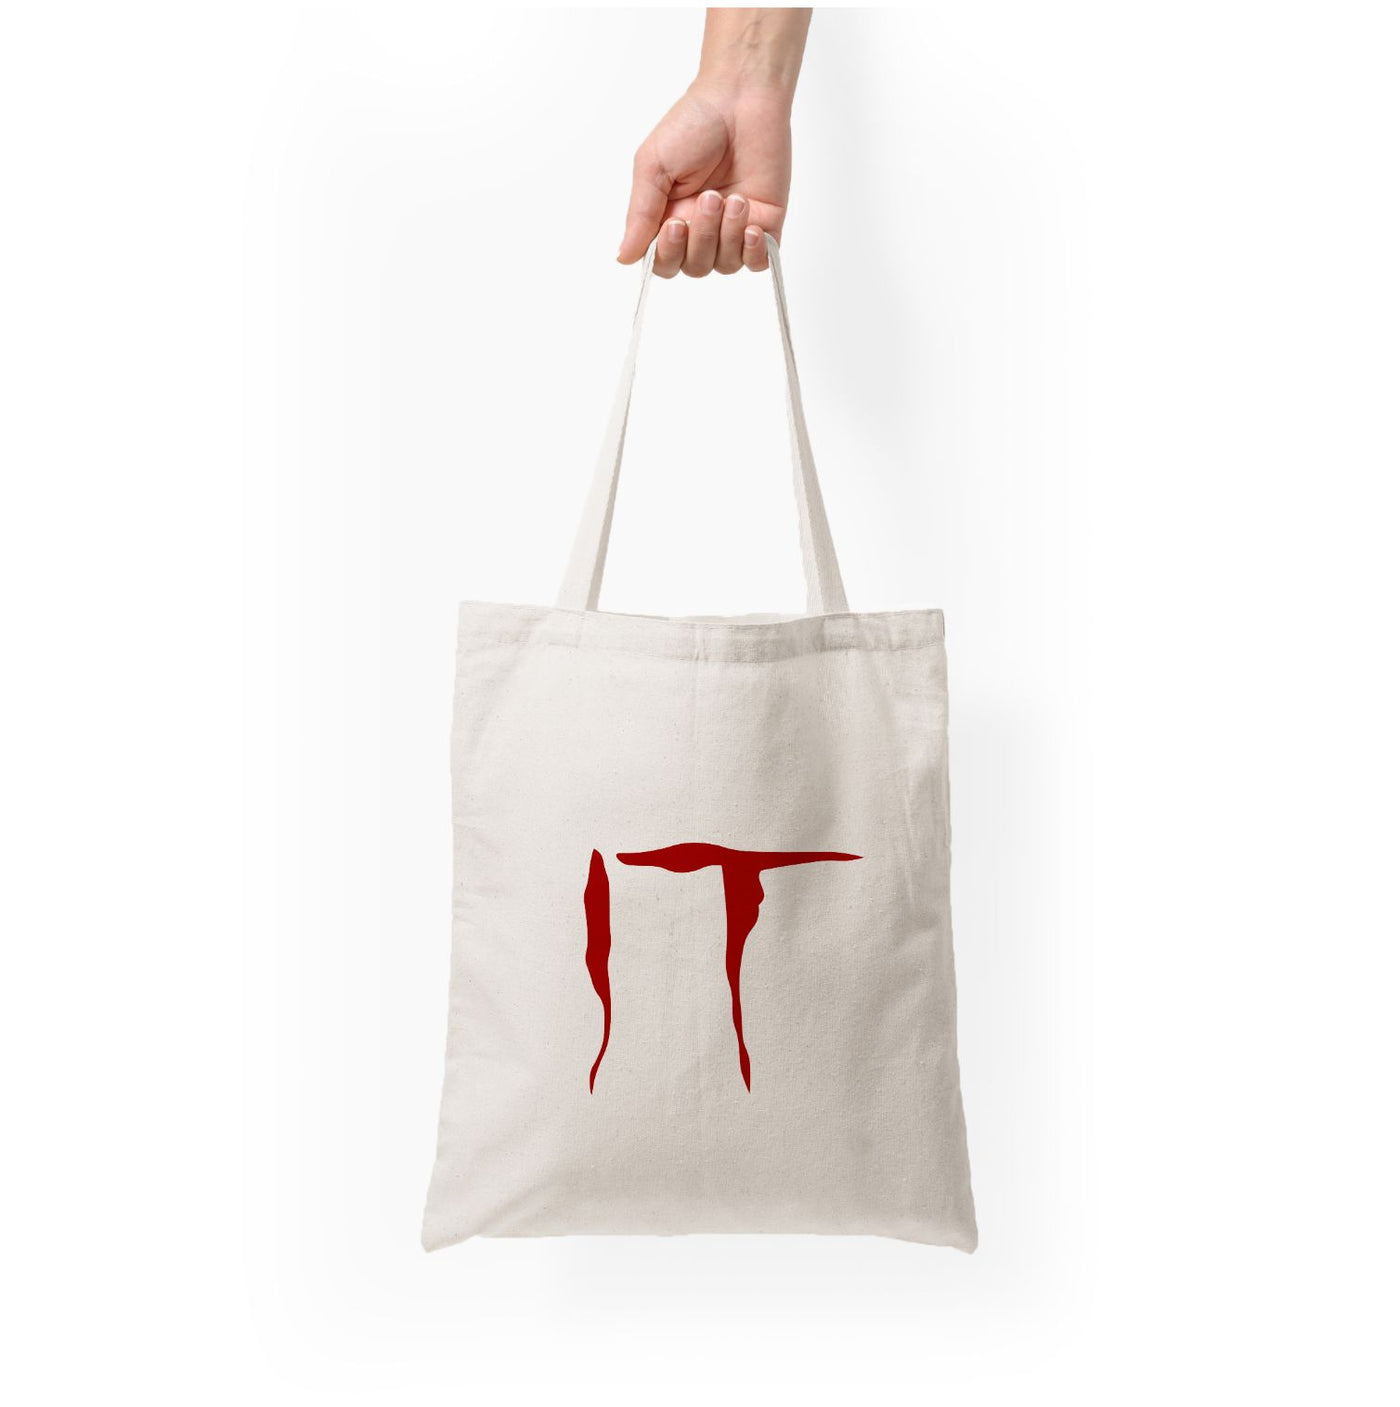 Text - IT Tote Bag